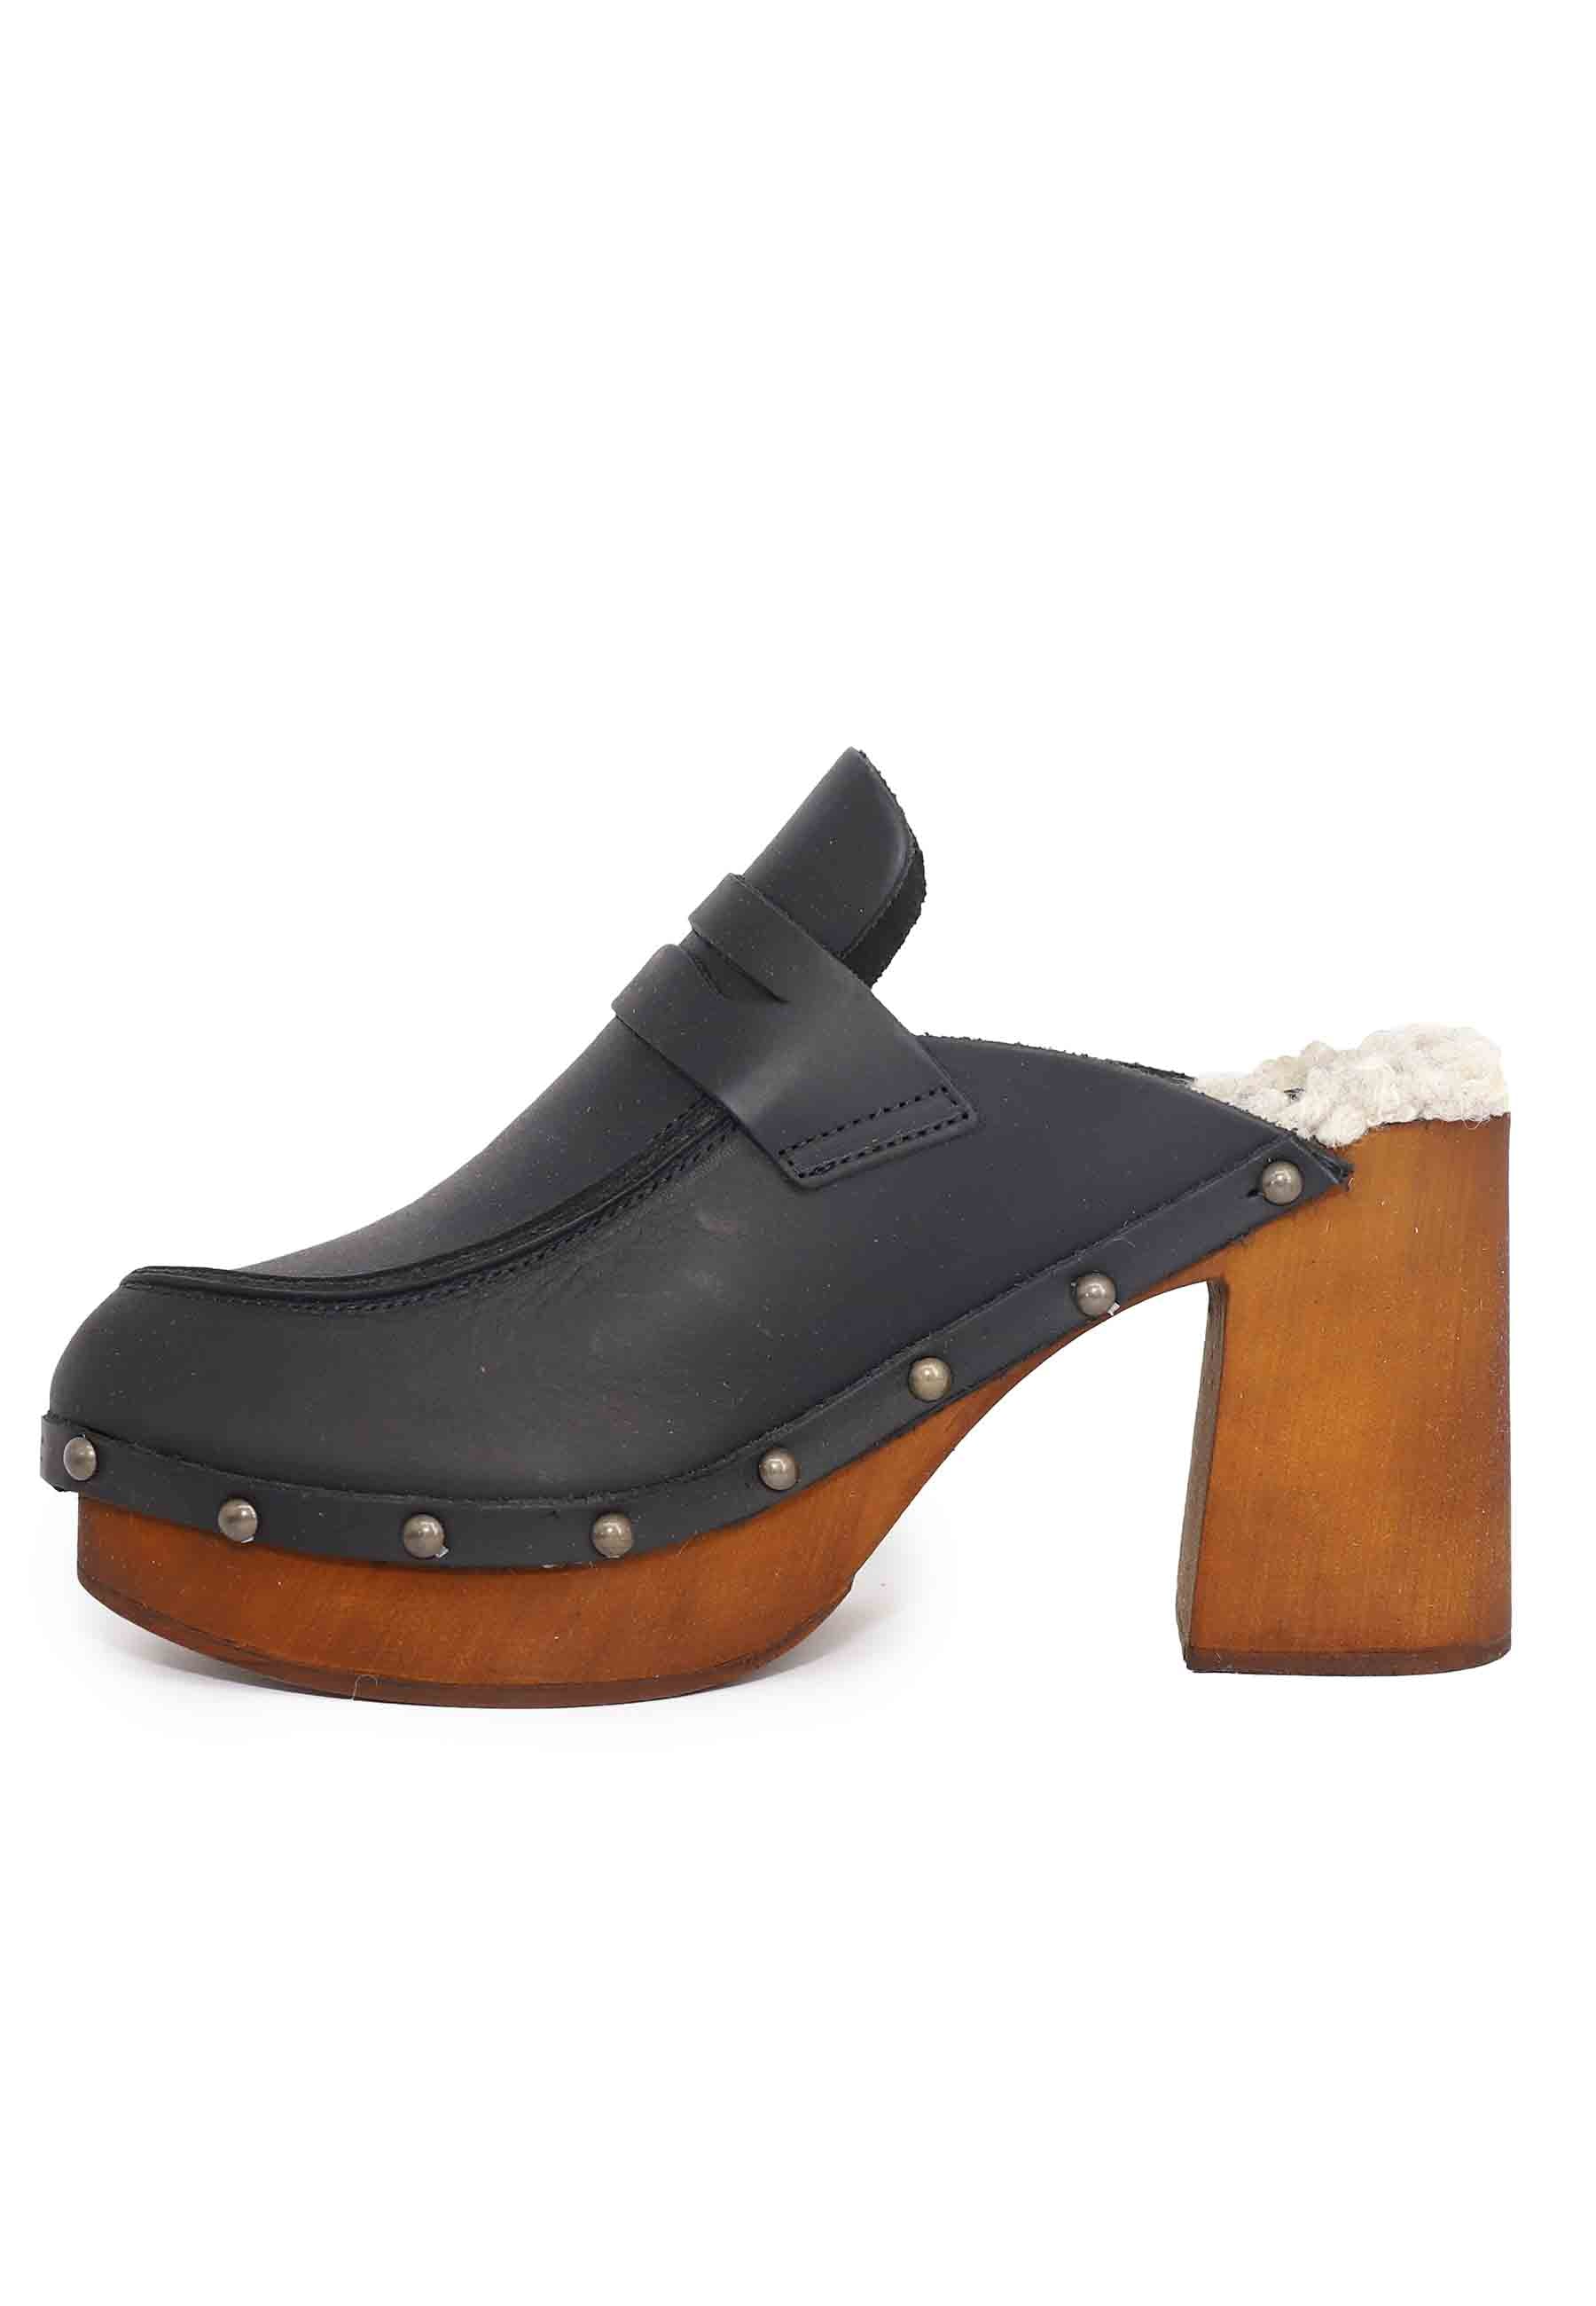 Women's clogs in black leather with eco fur insole and high heel